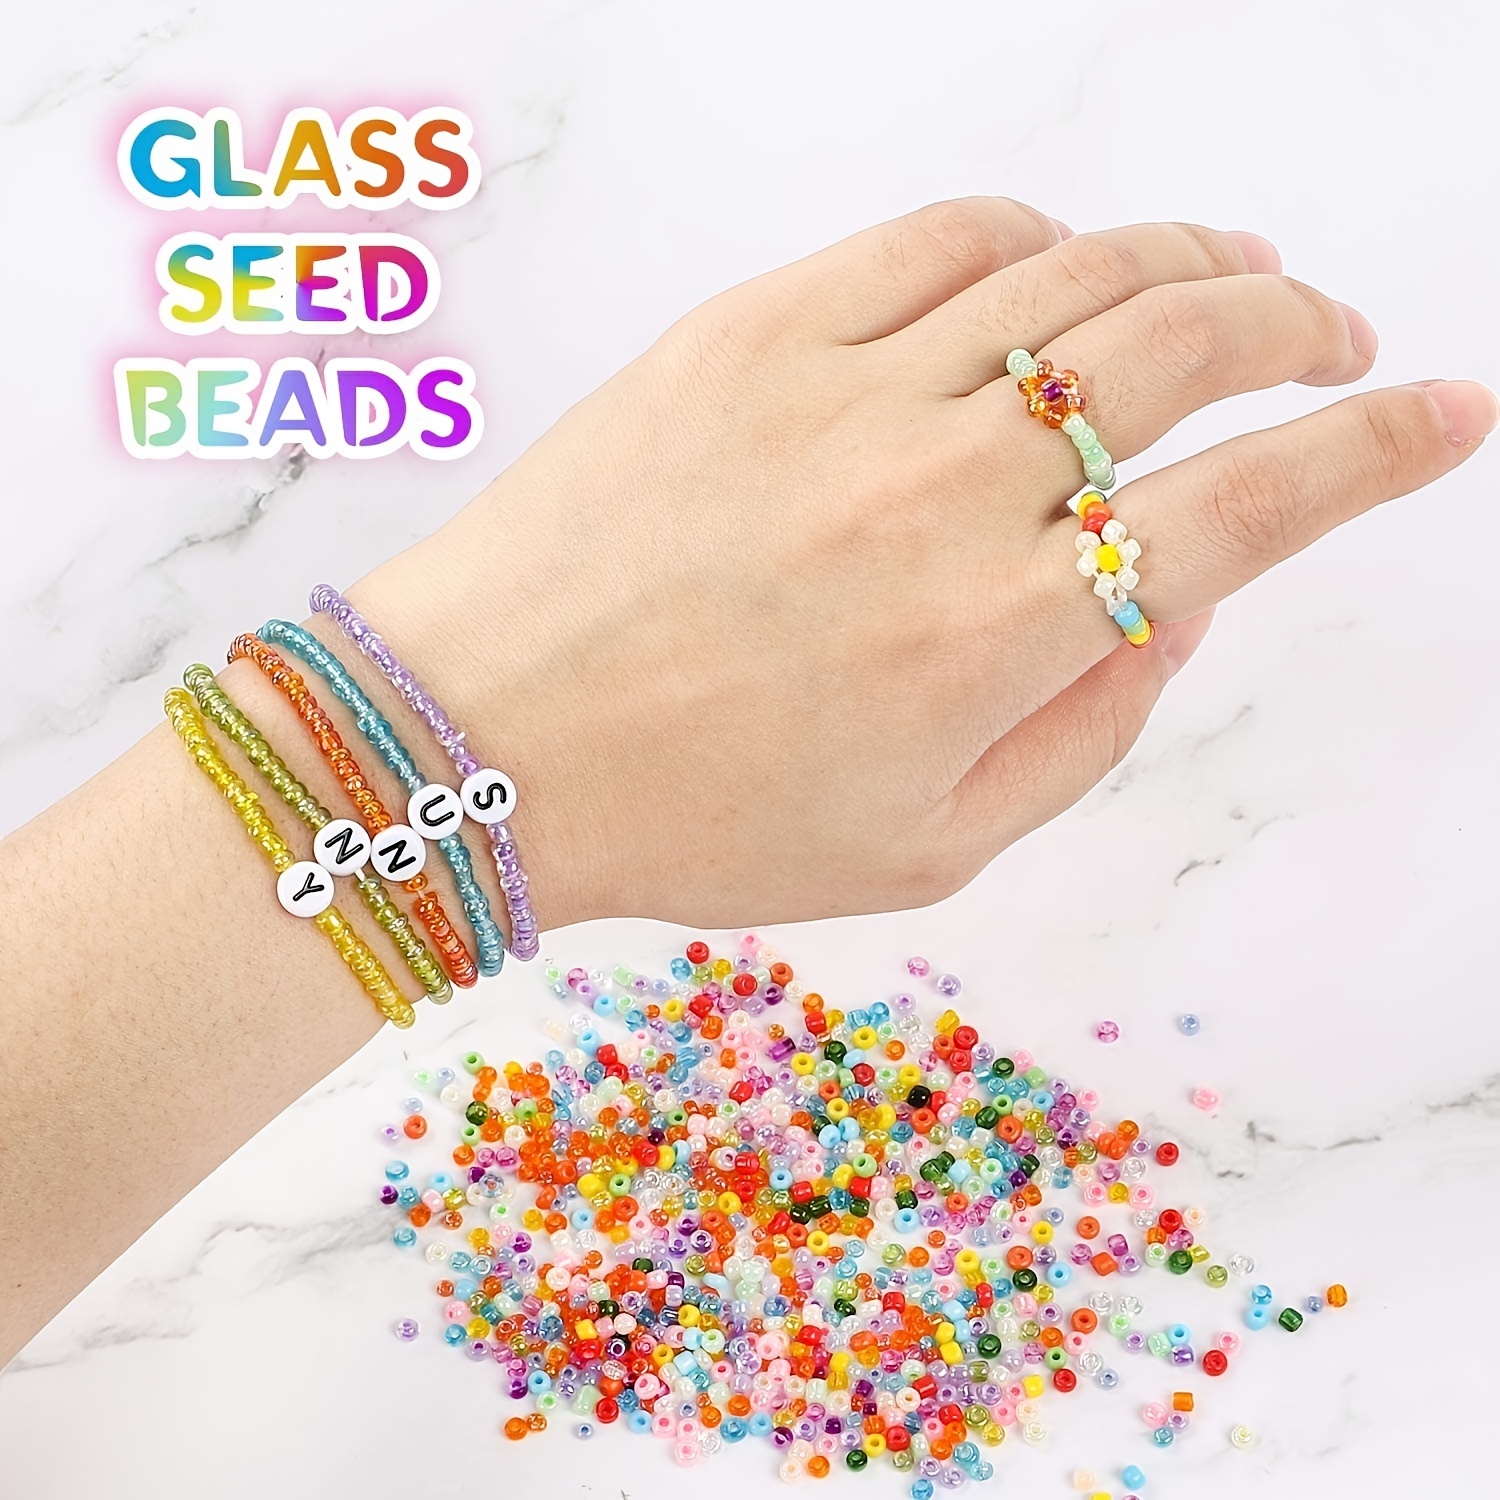 Glass Seed Beads And Letter Beads For Friendship Bracelets Jewelry